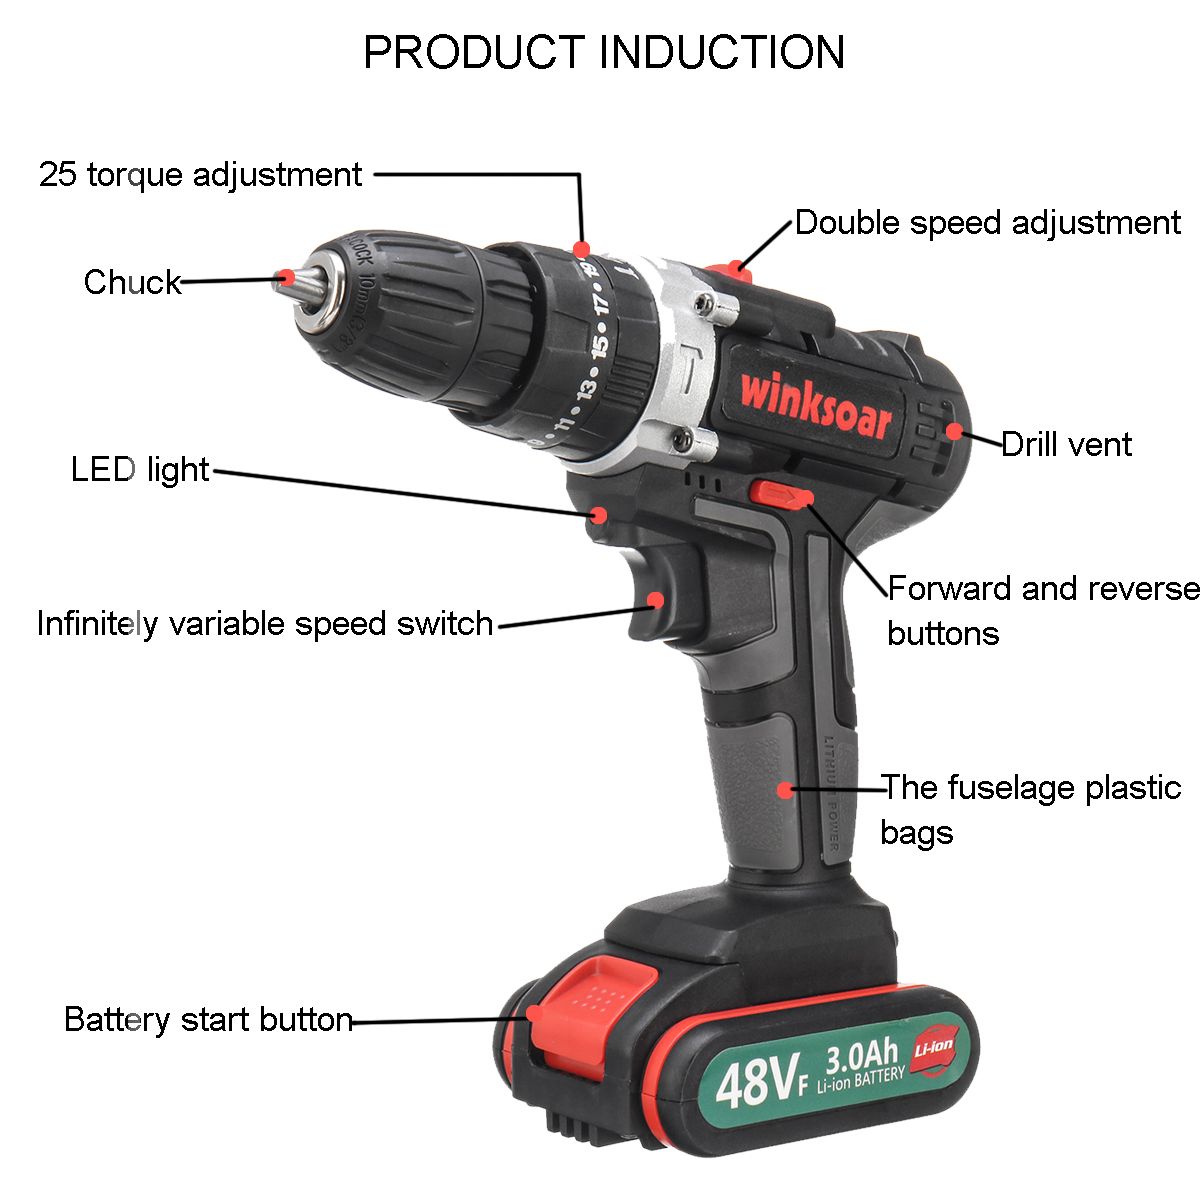 48VF-30Ah-Cordless-Power-Drills-Rechargable-Electric-Drill--251-Torque-Drilling-Power-Tool-1474524